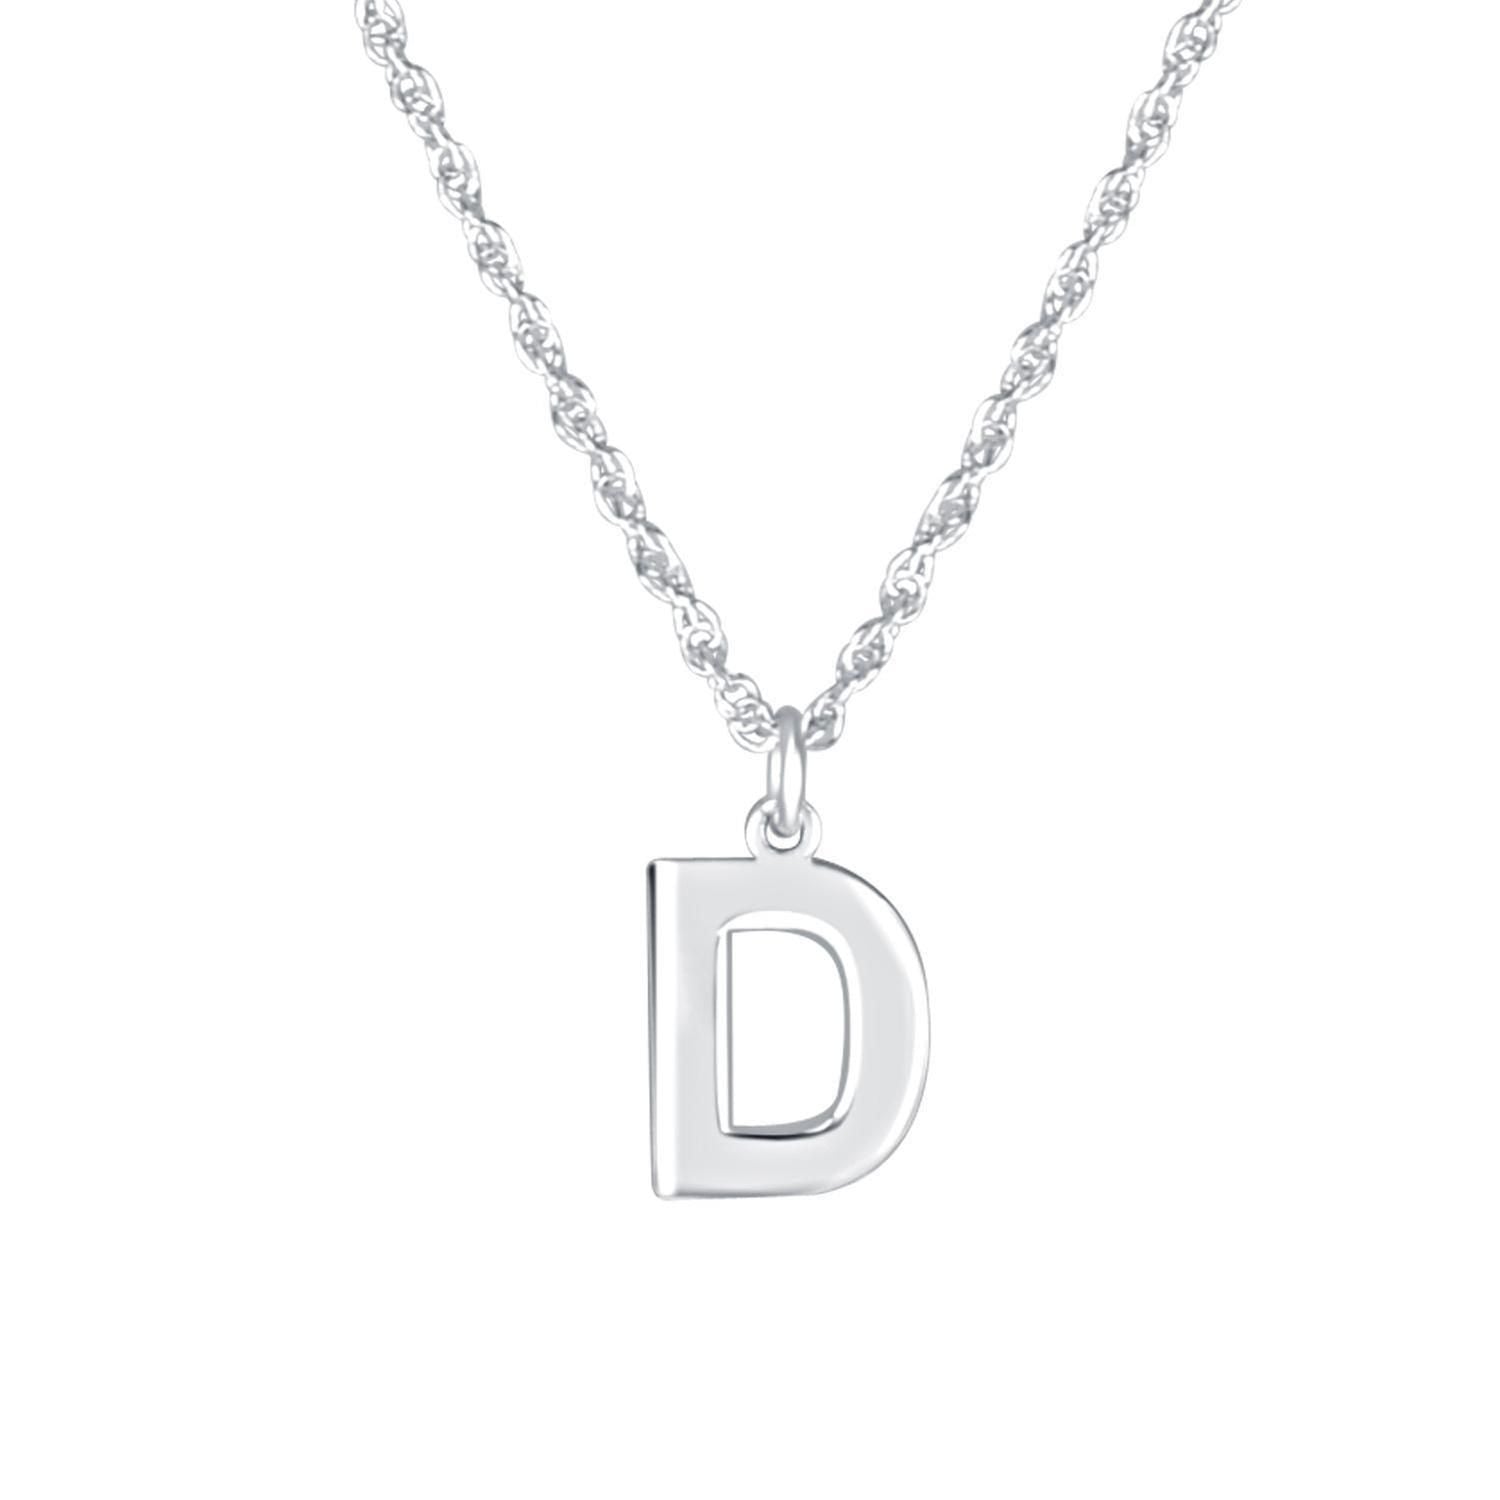 Personalized Initial Necklace 2